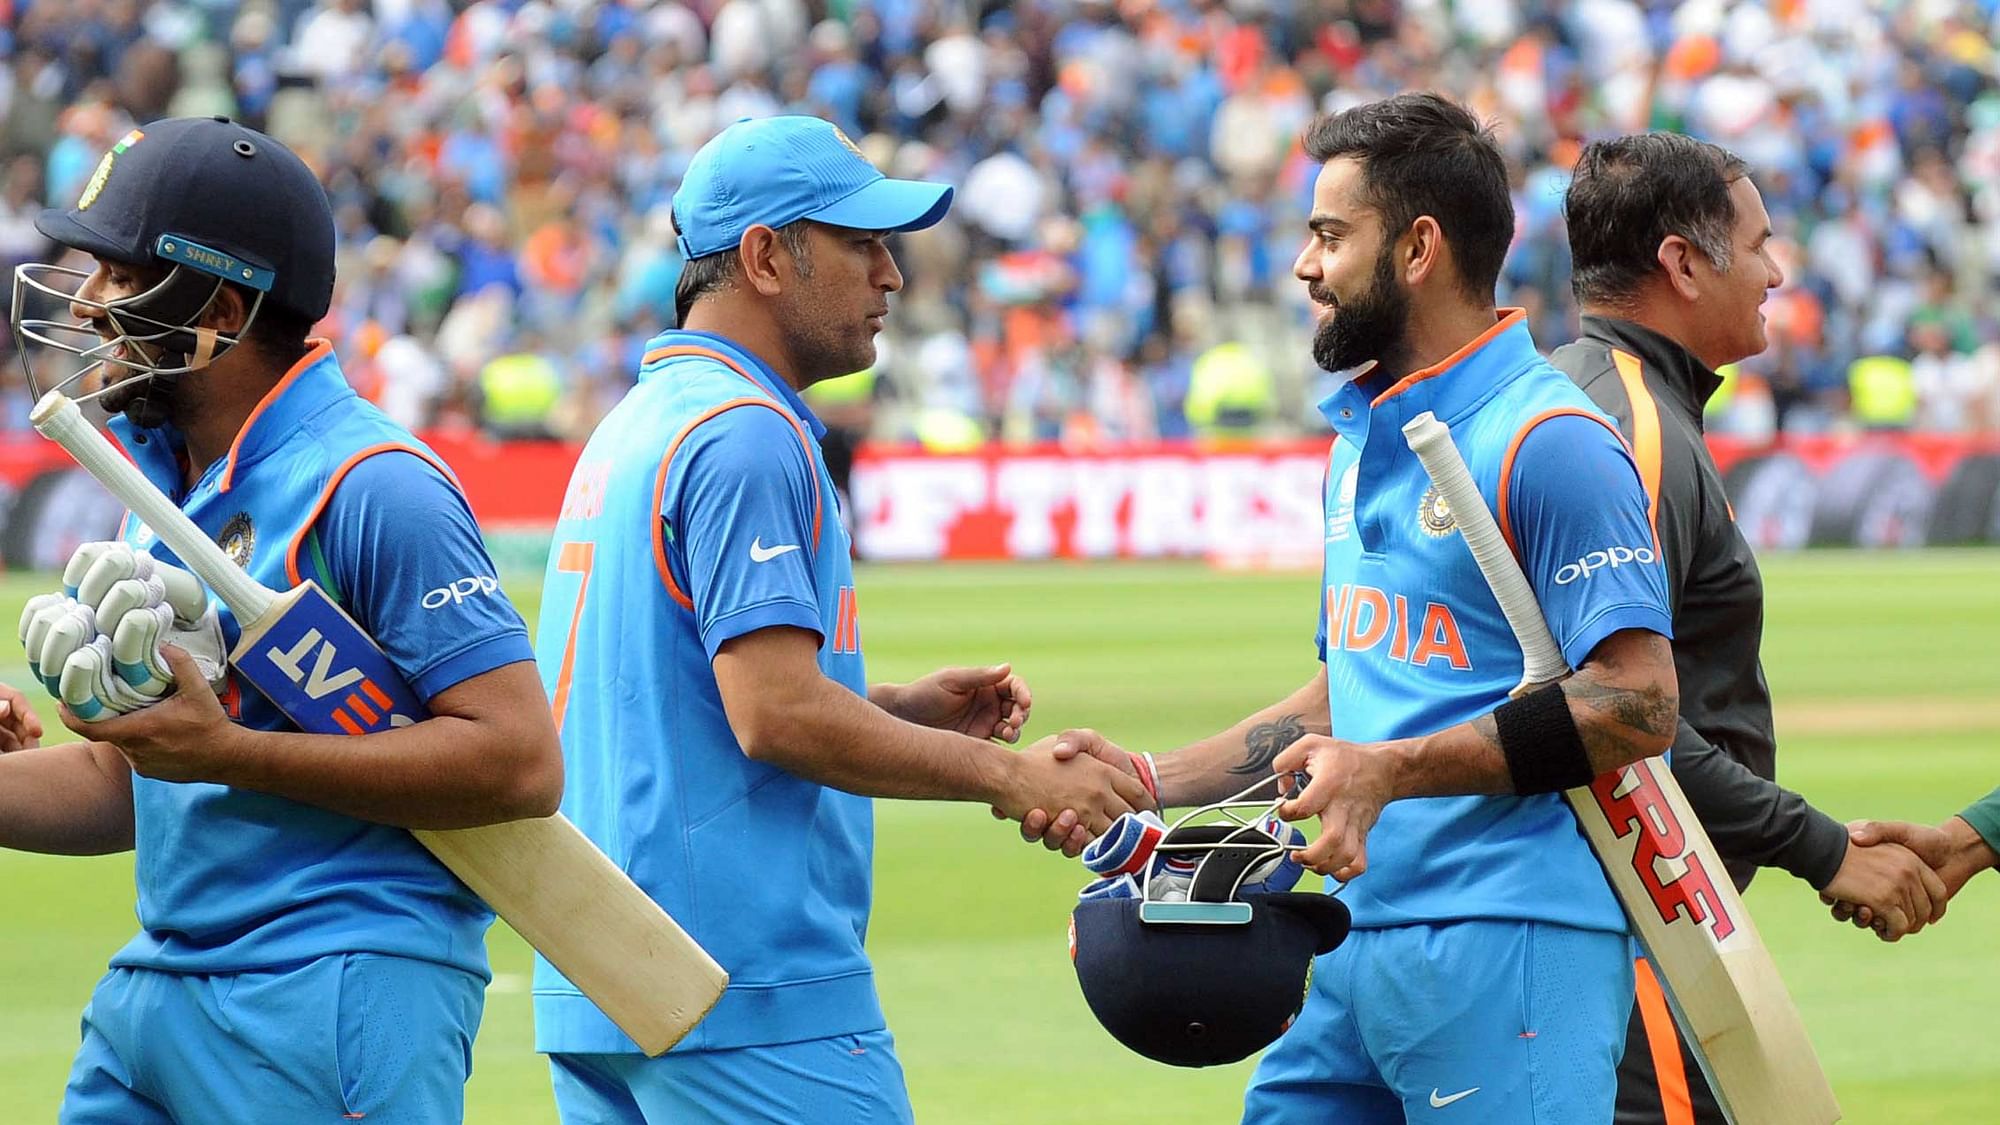 India and Bangladesh players shake hands at the end of the ICC Champions Trophy semifinal match between Bangladesh and India at Edgbaston in Birmingham. (Photo: AP)